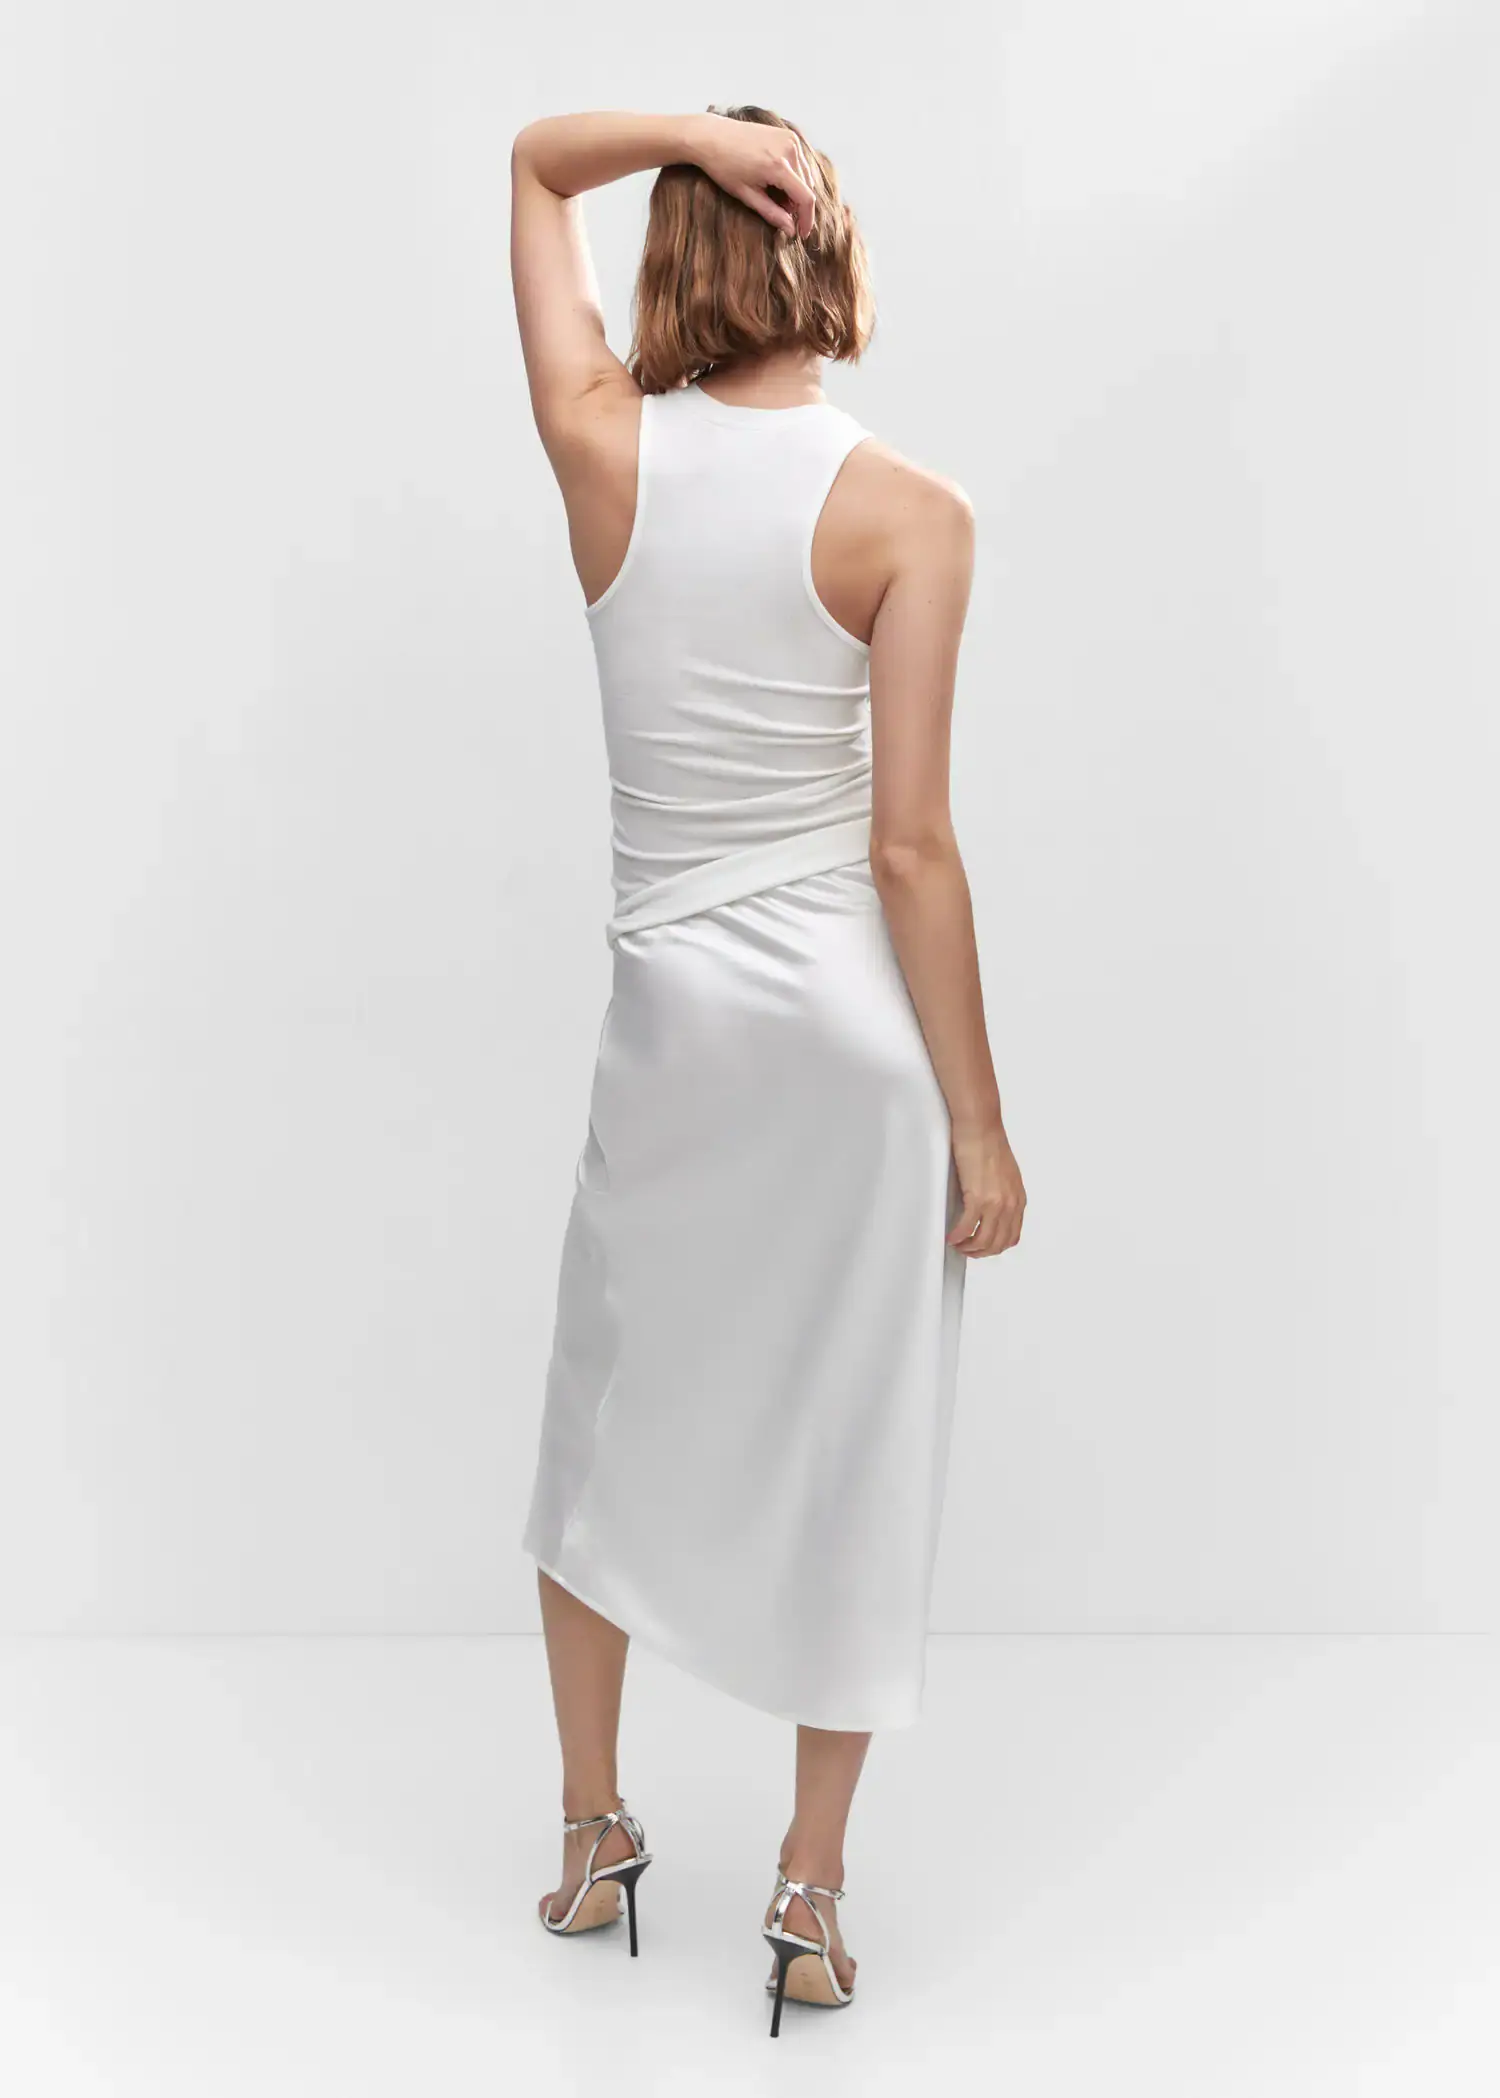 Mango Ribbed strap top. a woman wearing a white dress standing in a room. 